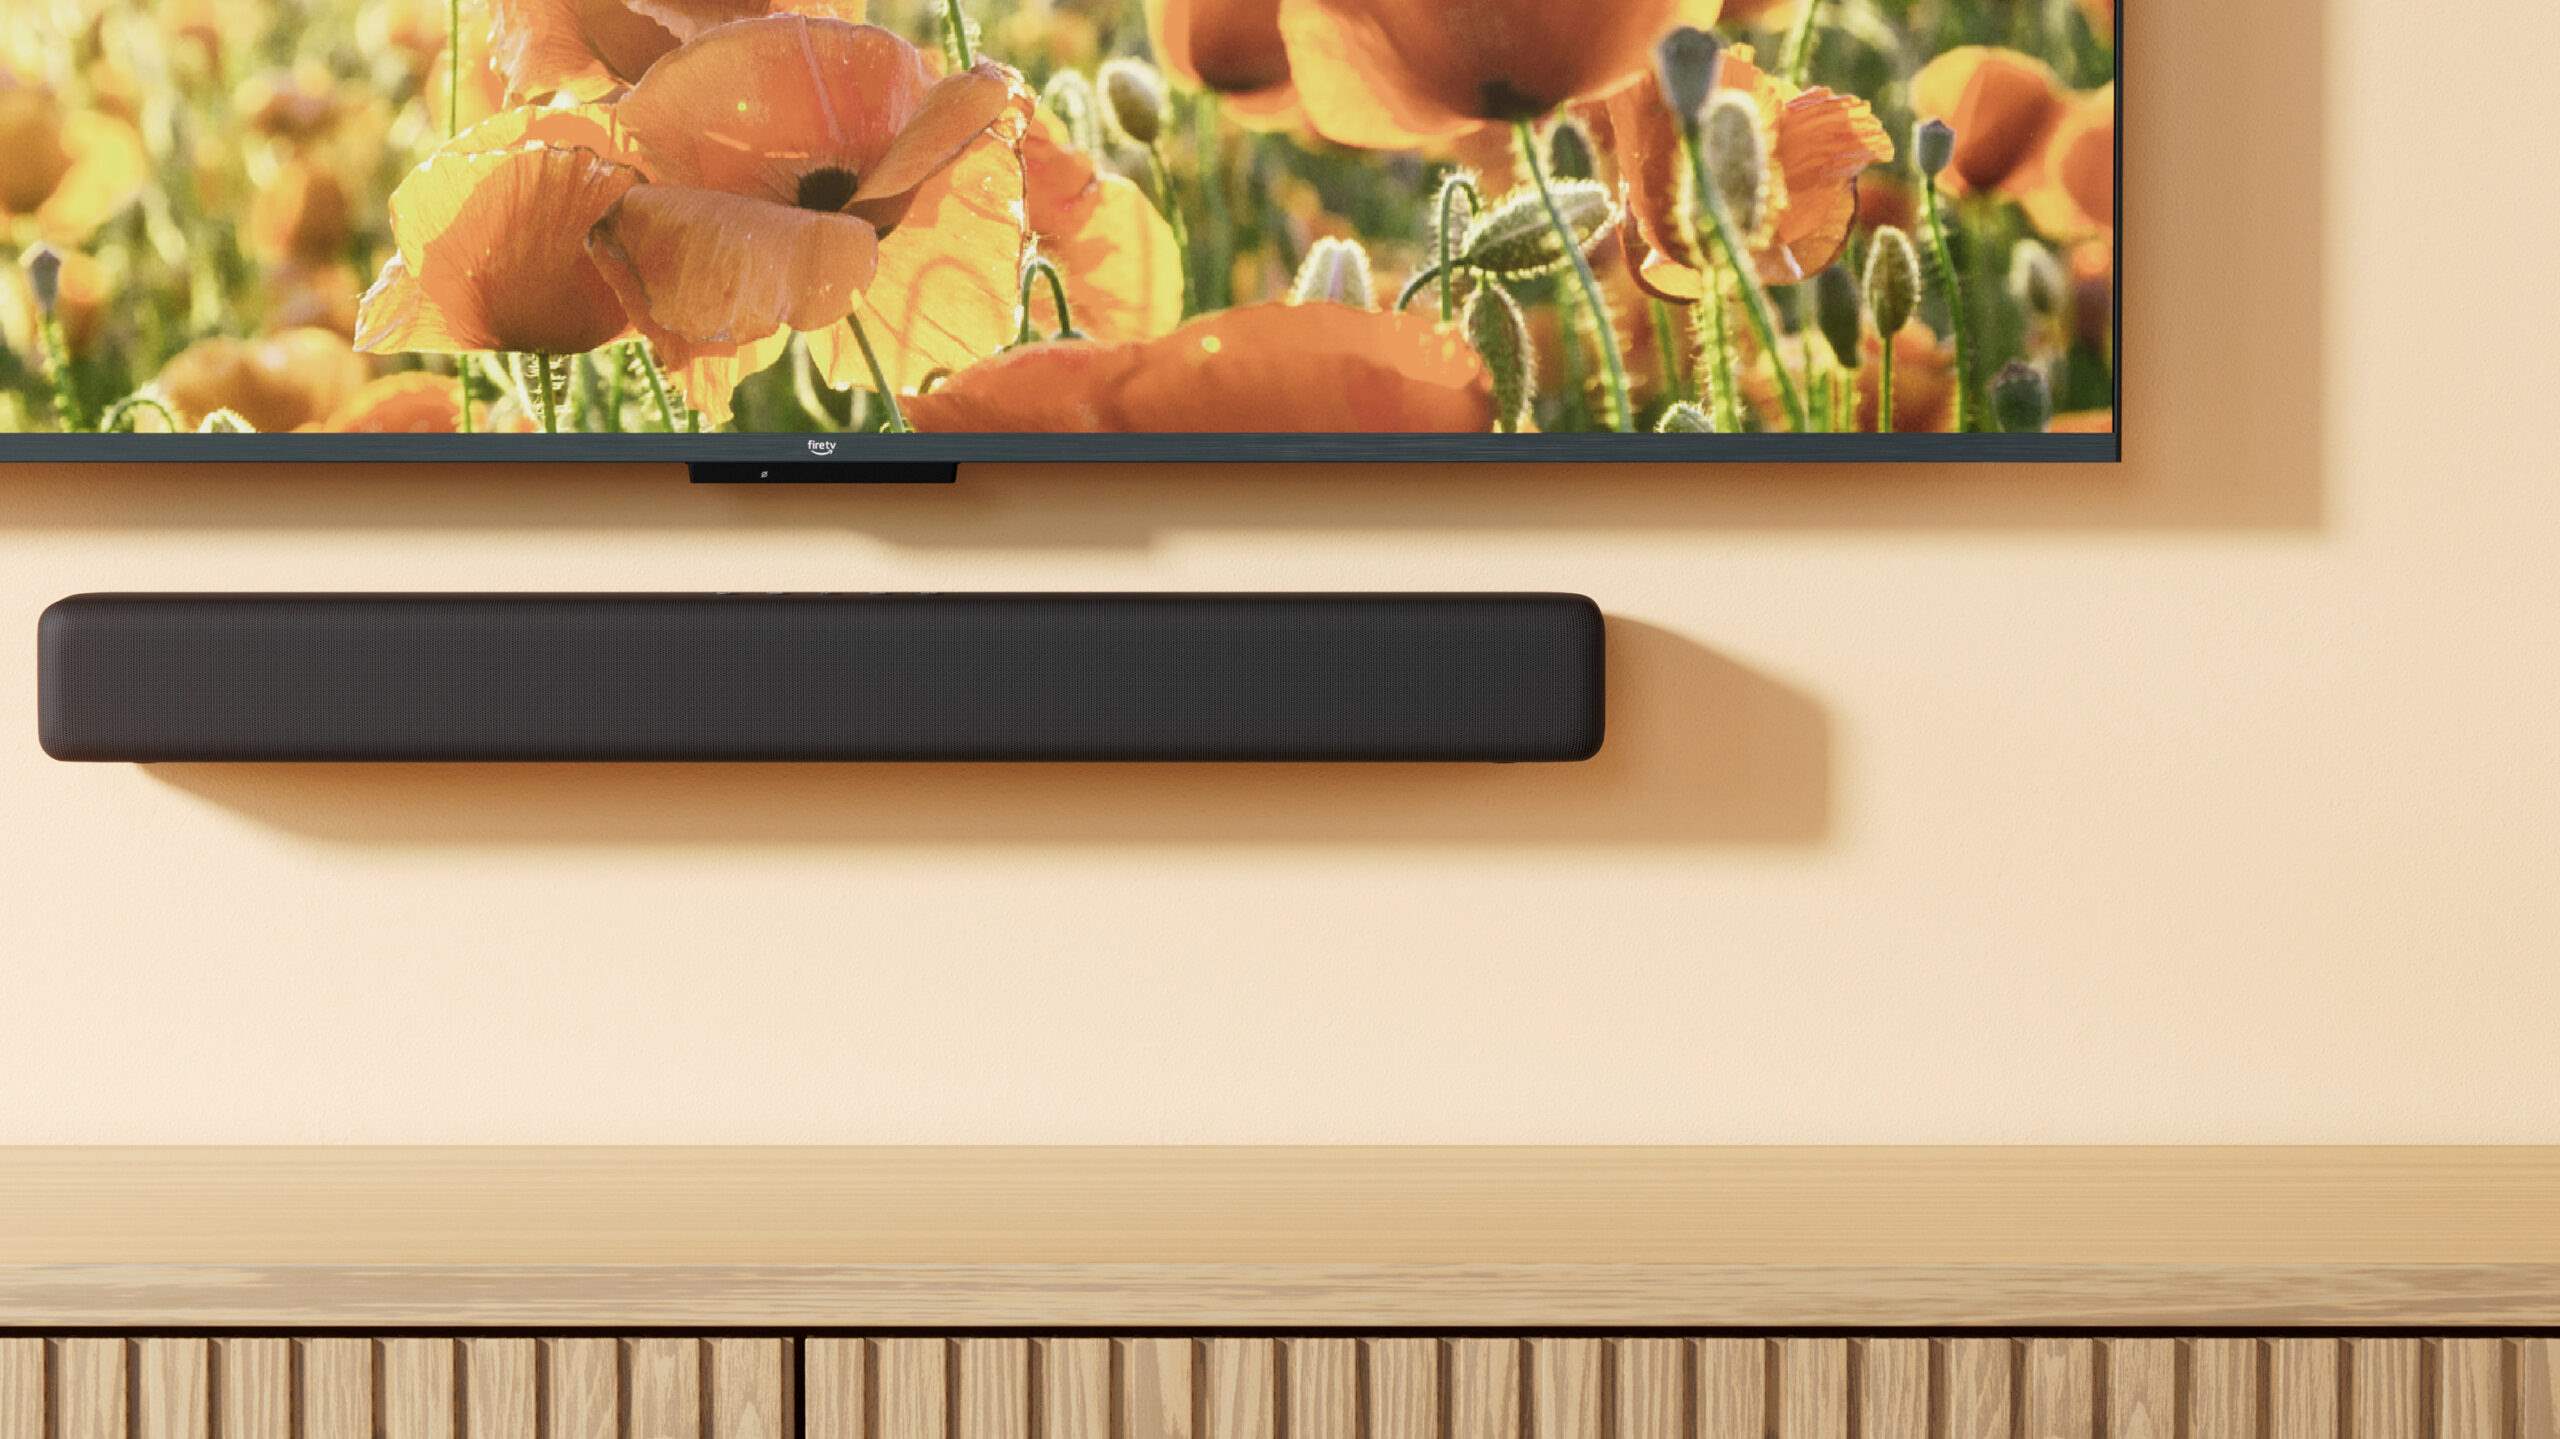 Amazon Launches Fire TV Soundbar: Enhancing Your Home Theater Experience